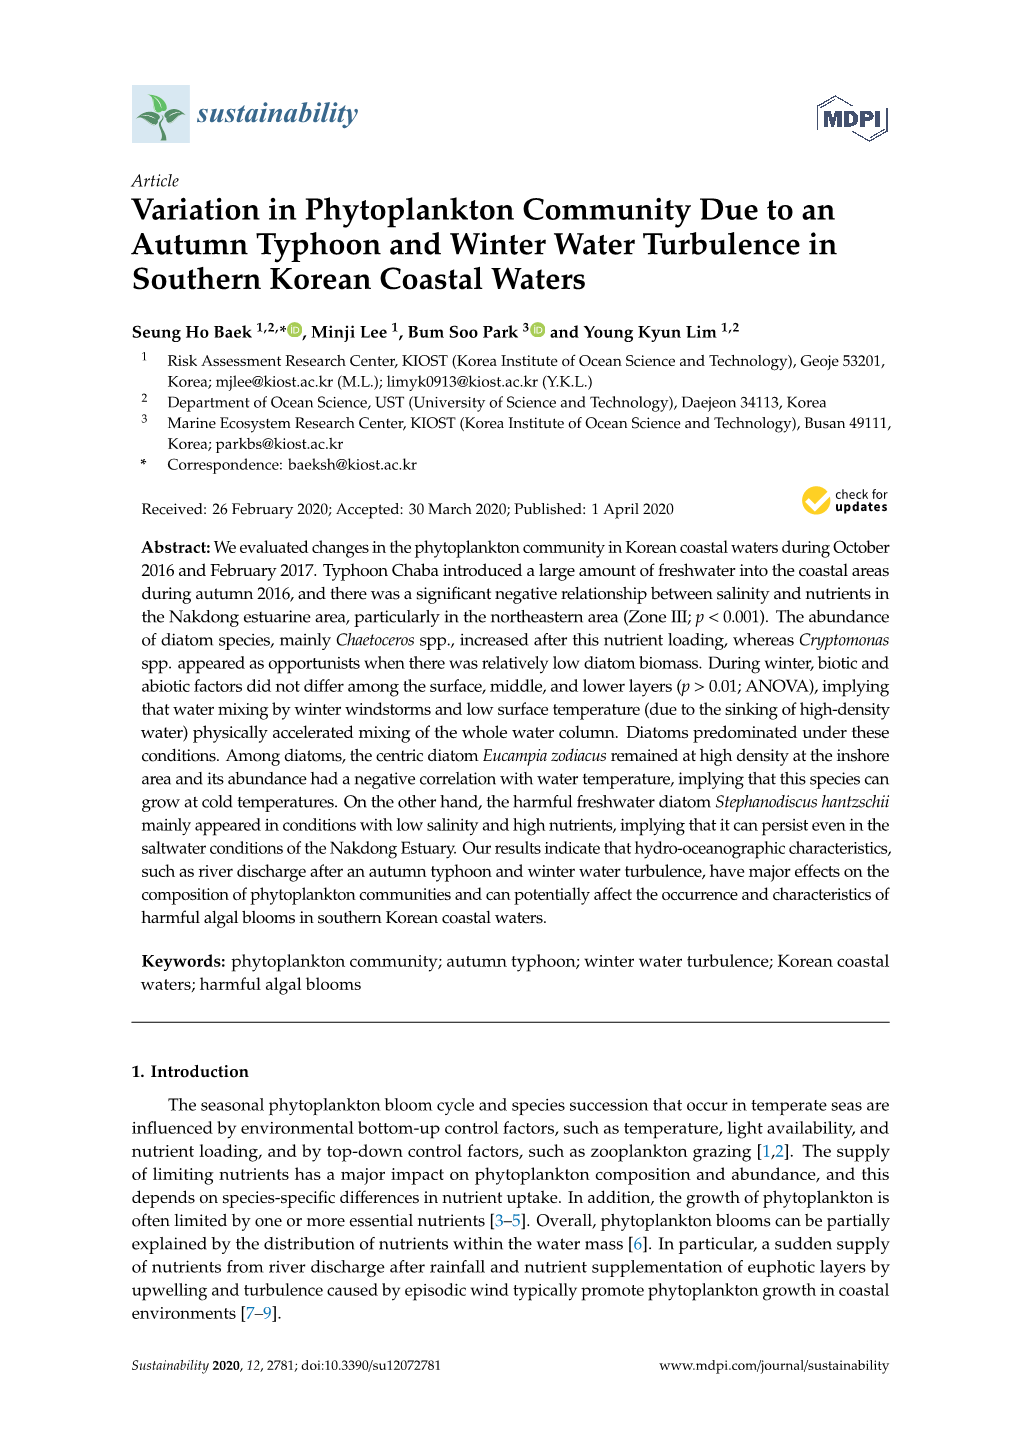 Variation in Phytoplankton Community Due to an Autumn Typhoon and Winter Water Turbulence in Southern Korean Coastal Waters